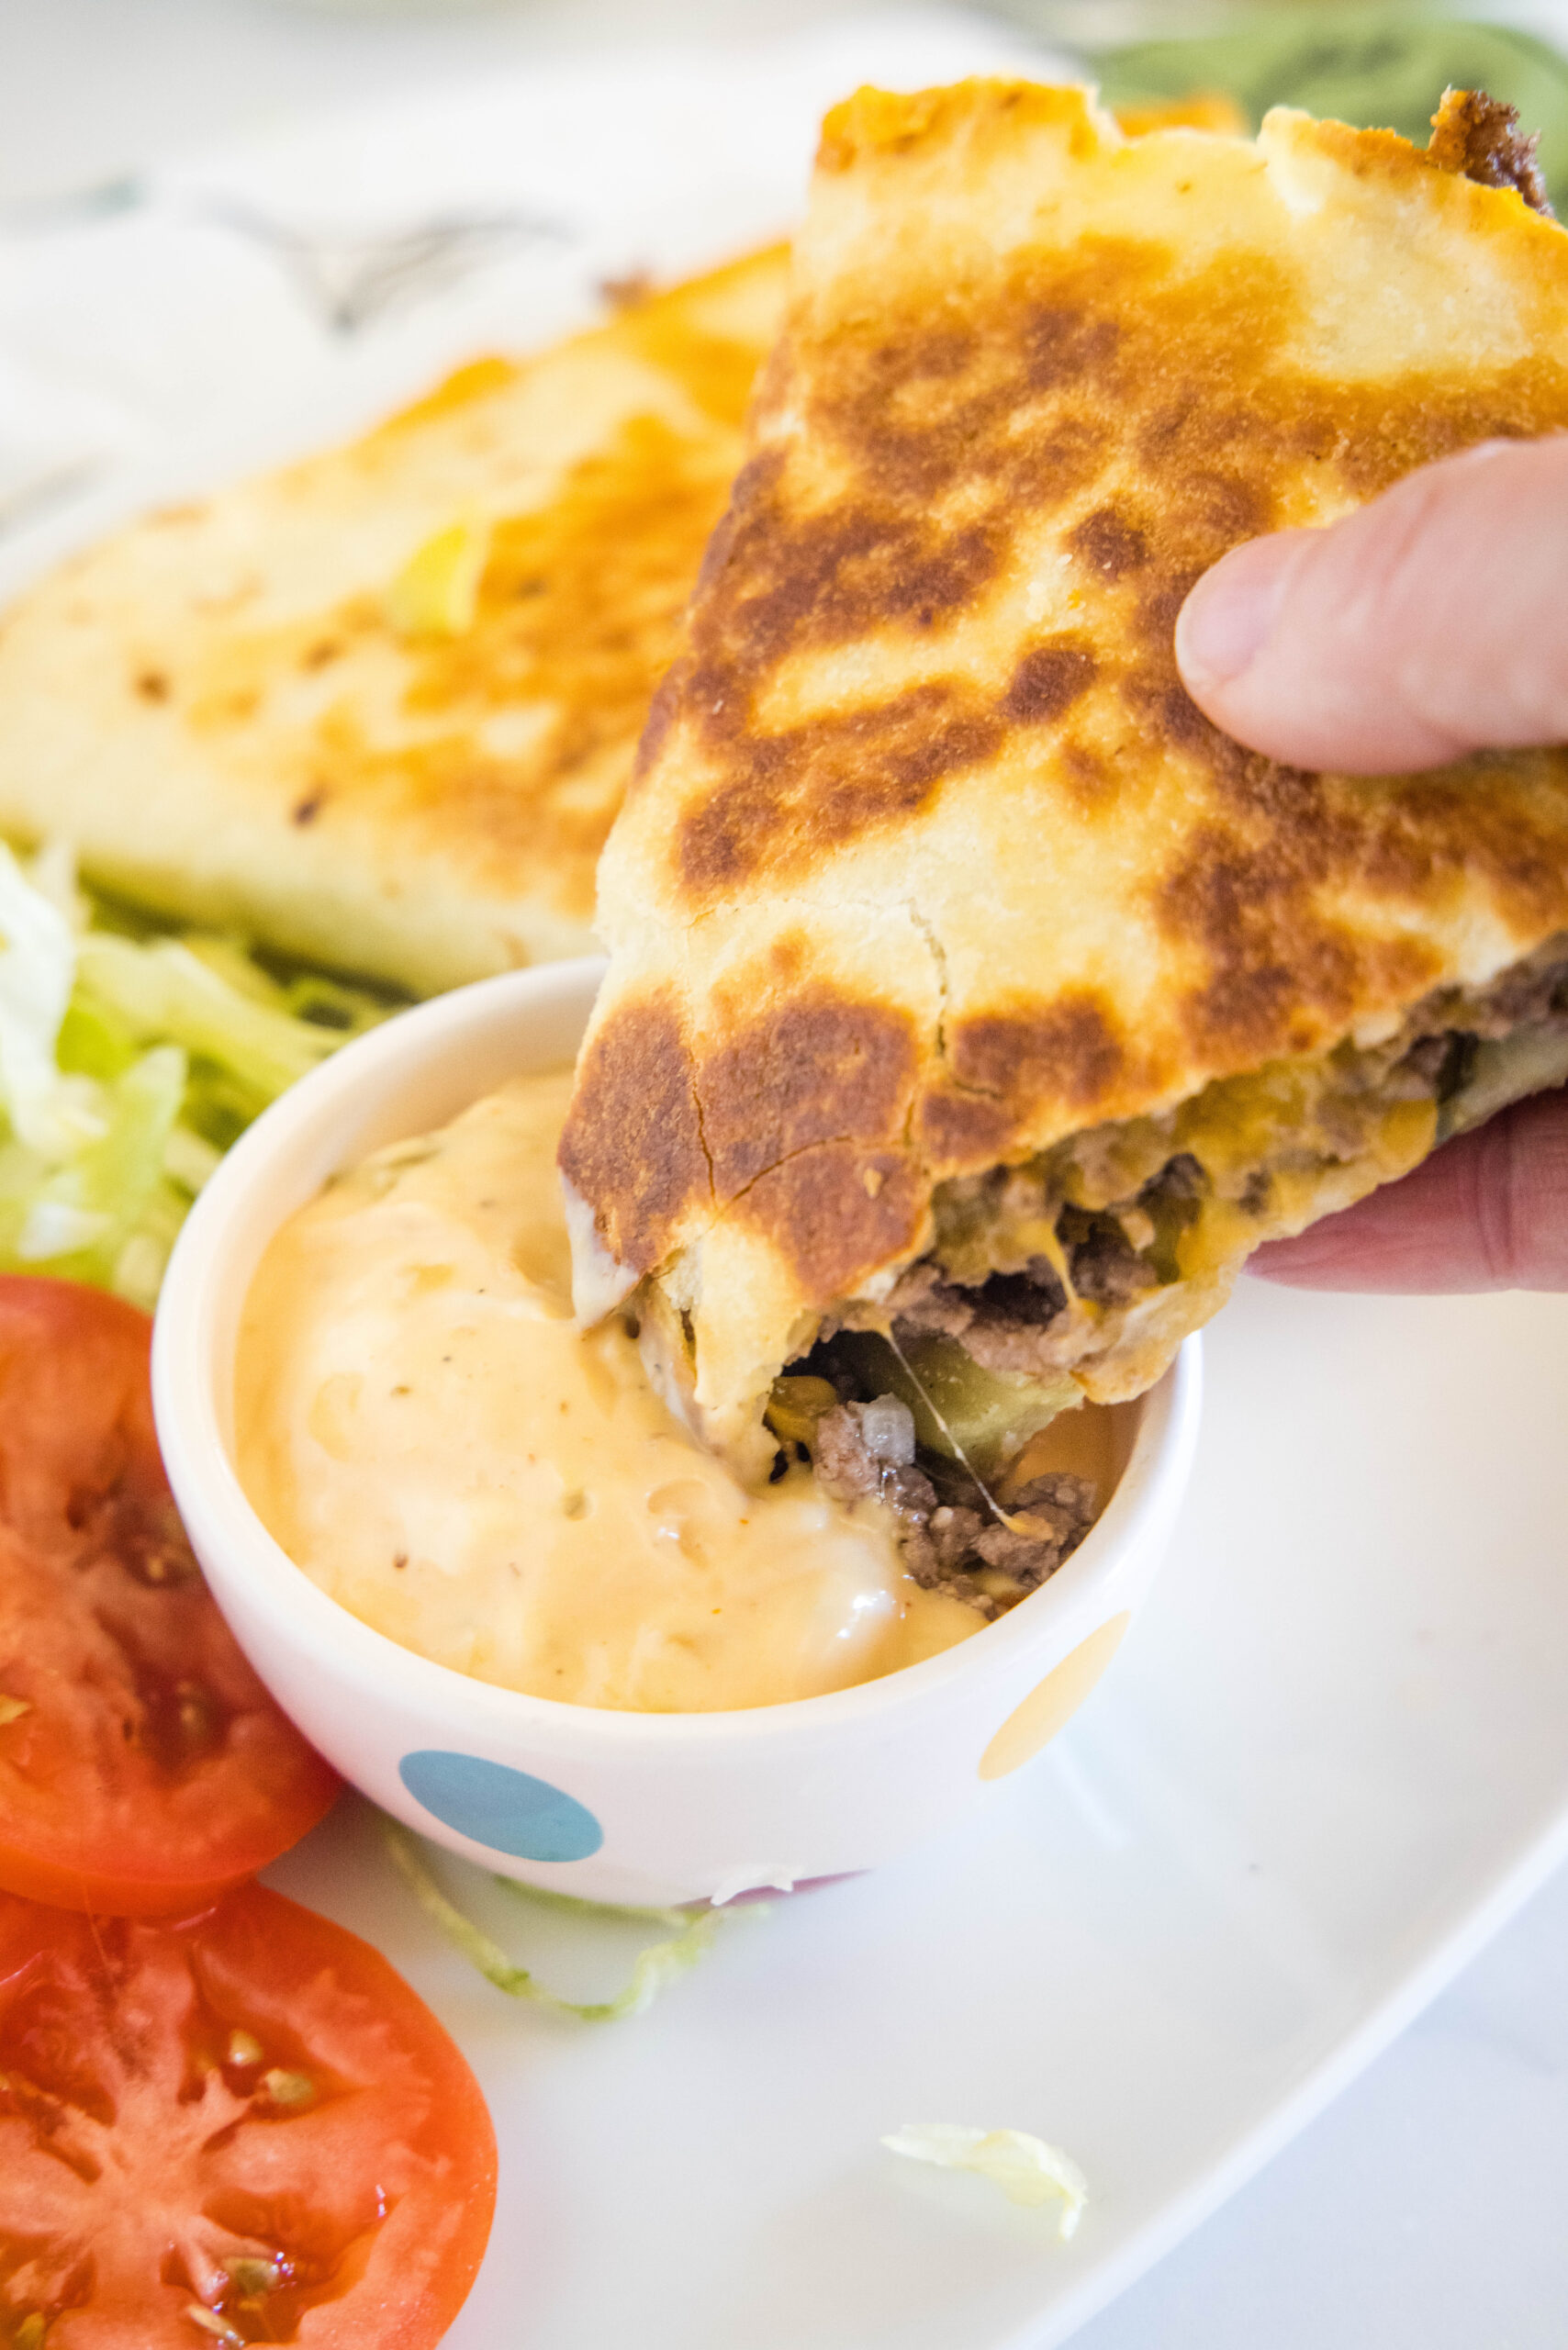 A hand dipping a cheeseburger quesadilla into a small bowl of burger sauce, with more quesadillas in the background.